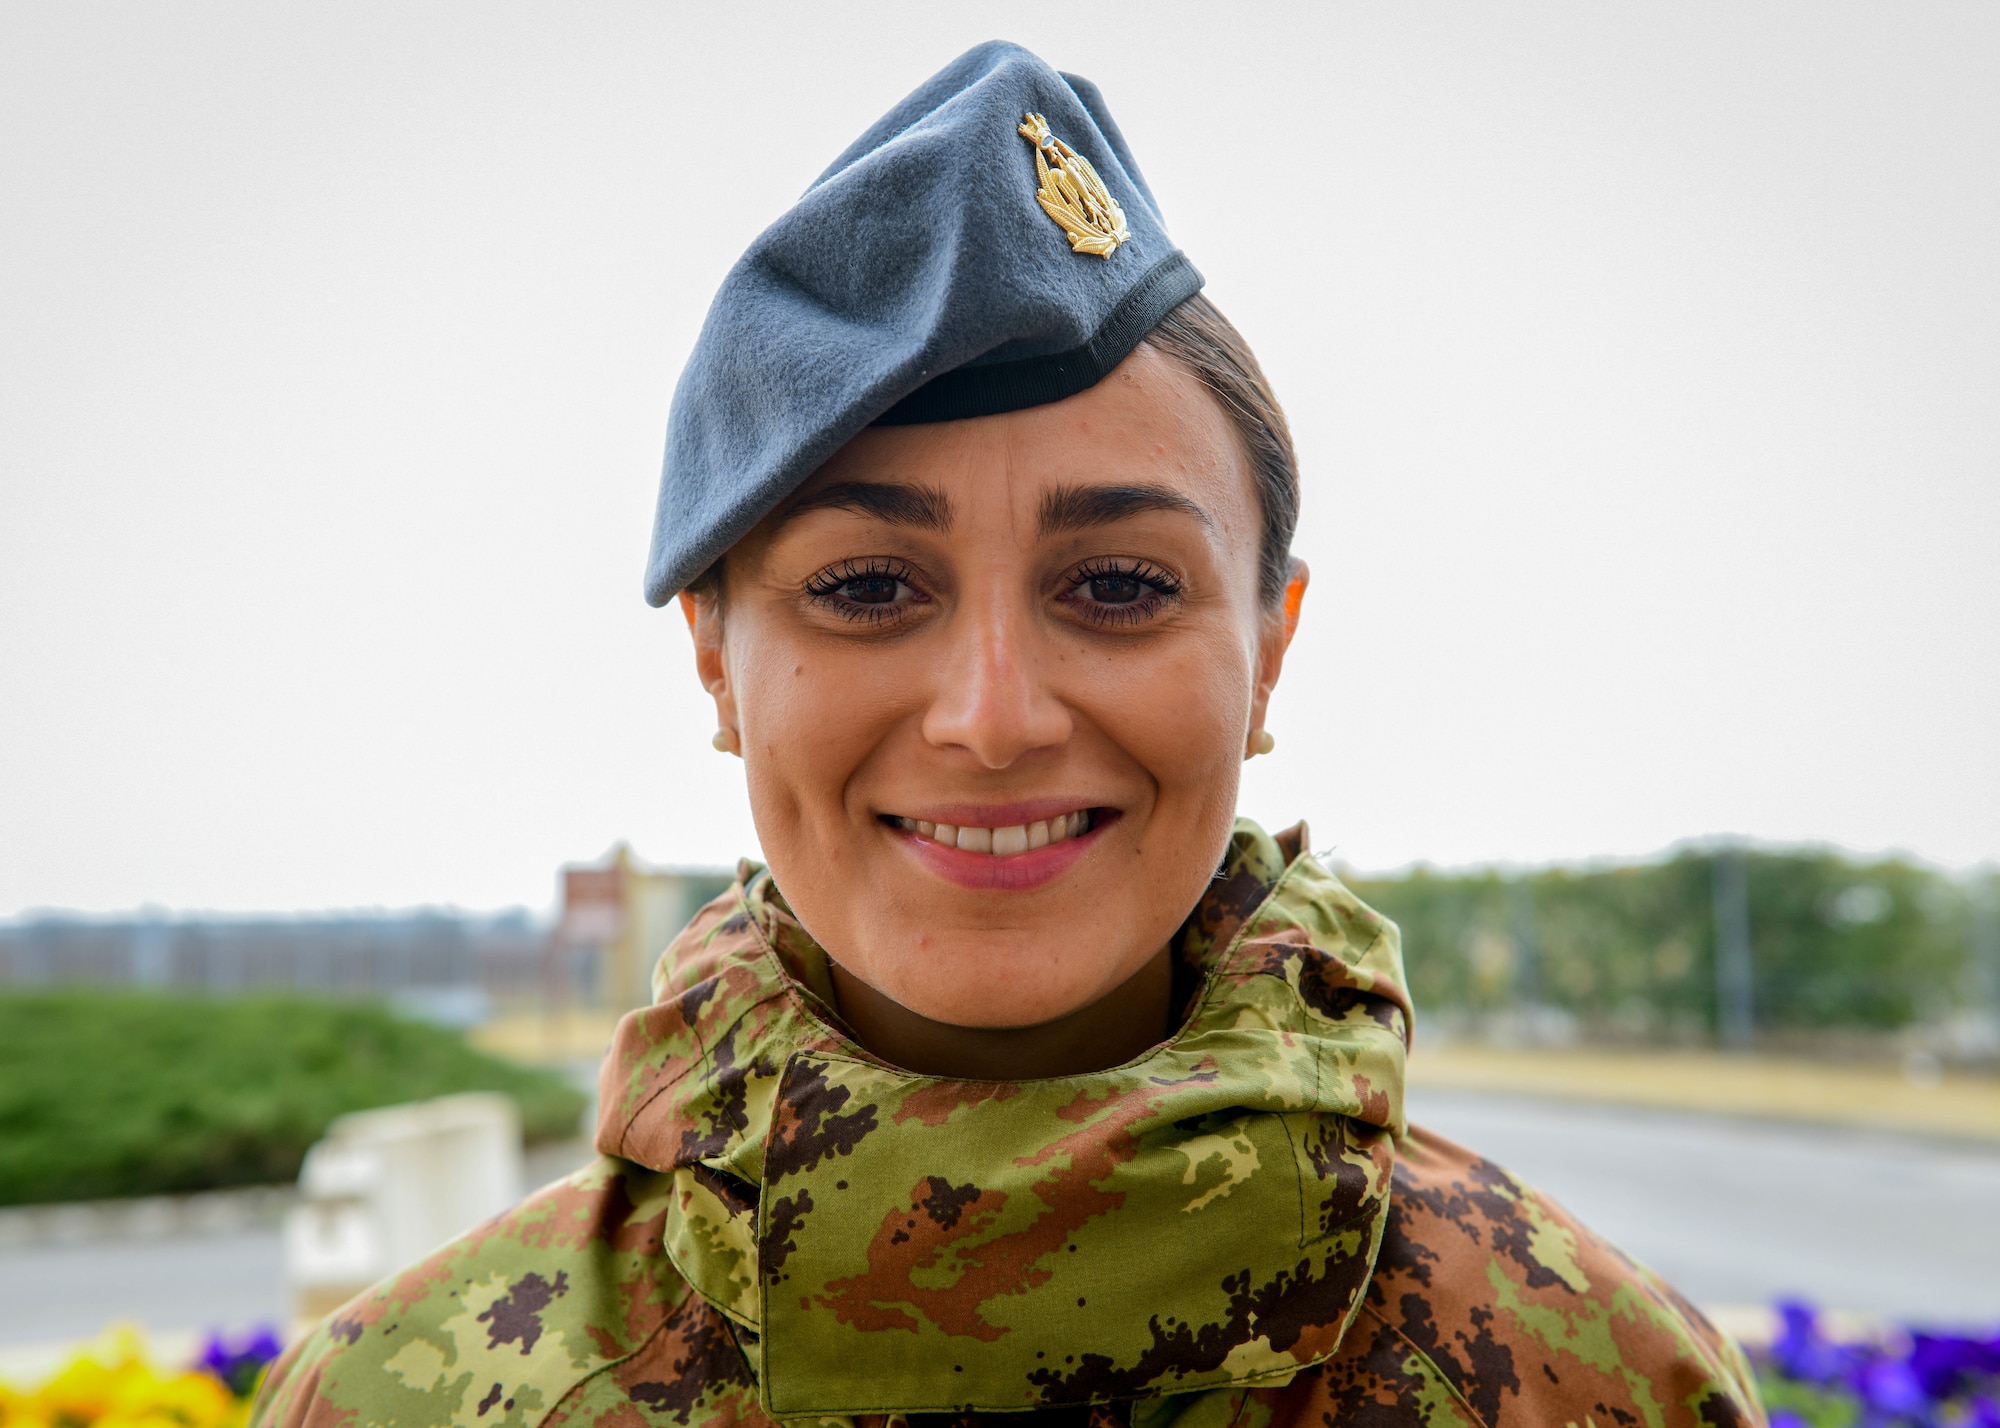 Italian air force Senior Master Sgt. Cristina Deligia, Italian air force Security Forces Squadron force protection operator, poses for a photo at Aviano Air Base, Italy, March 16, 2022. Deligia joined the Italian air force June 2, 2018, and arrived to Aviano July 2021. The 31st Fighter Wing celebrates Women’s History Month alongside the Italian air force throughout the month of March with events such as a ruck march, luncheon, all-women’s panel and more. (U.S. Air Force photo by Senior Airman Brooke Moeder)